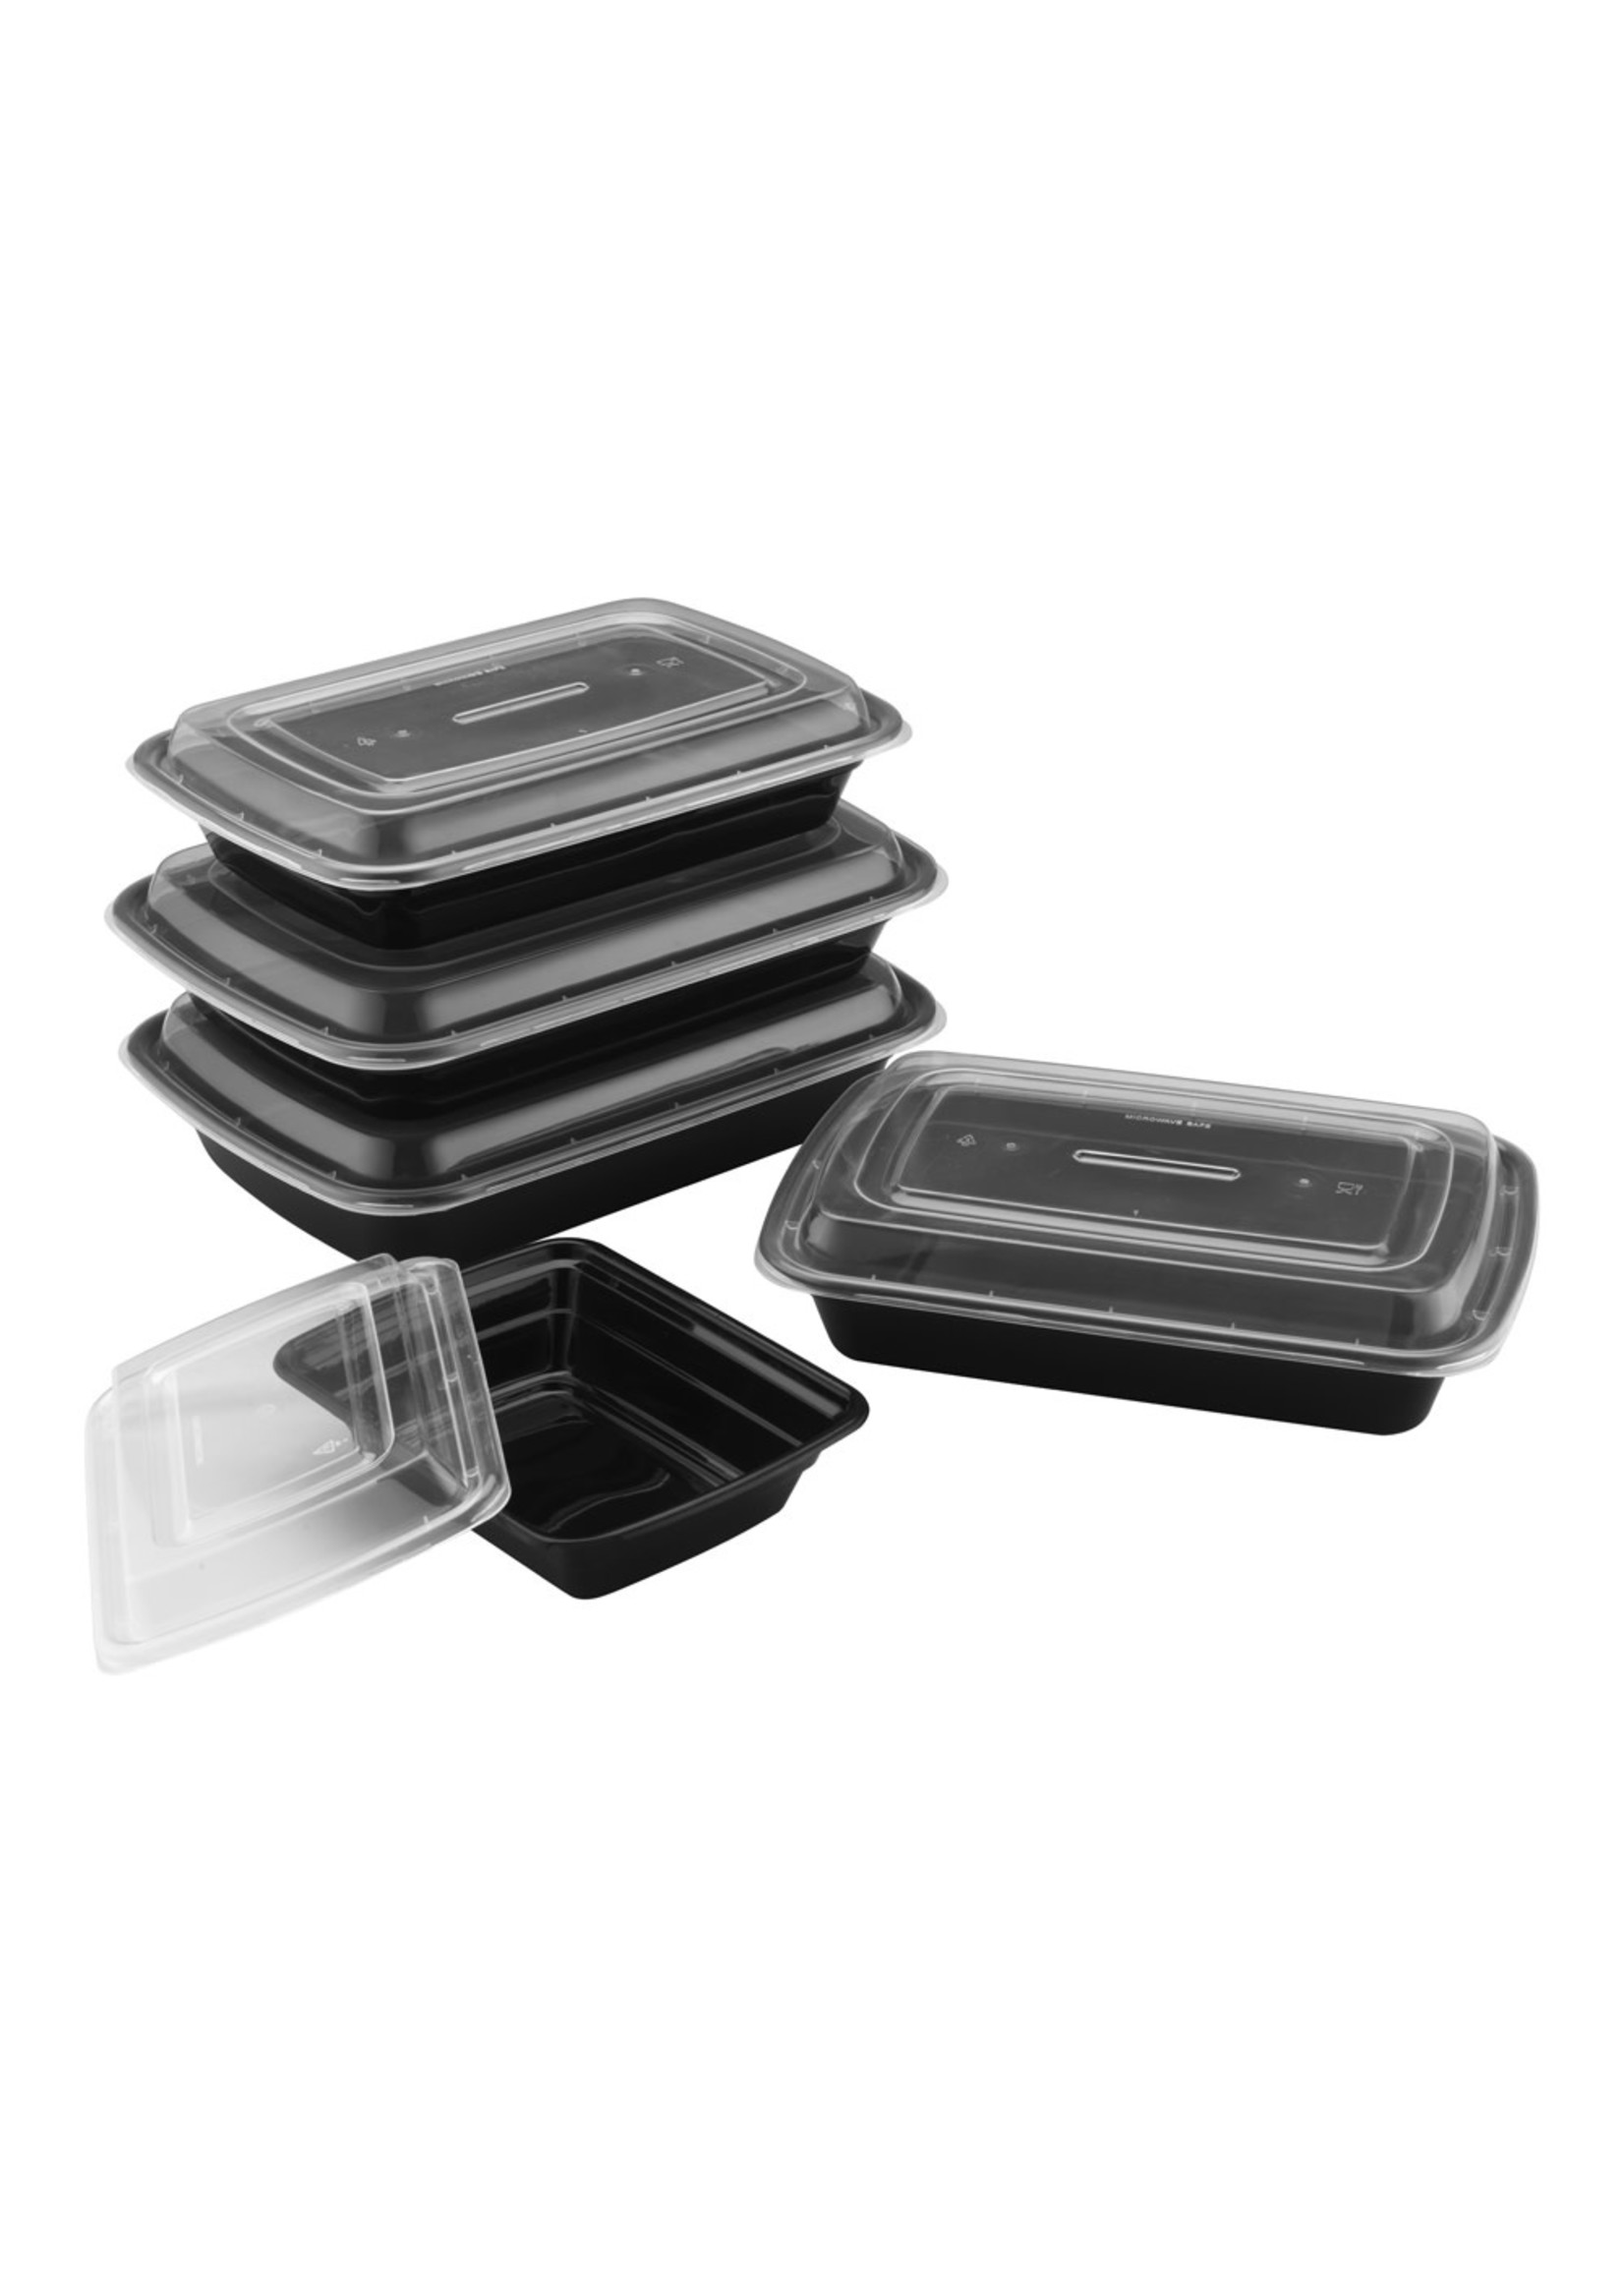 Tiya, Inc. E-32 / SRC32 - 32oz Rectangular Microwavable Container with Lid, 150 sets